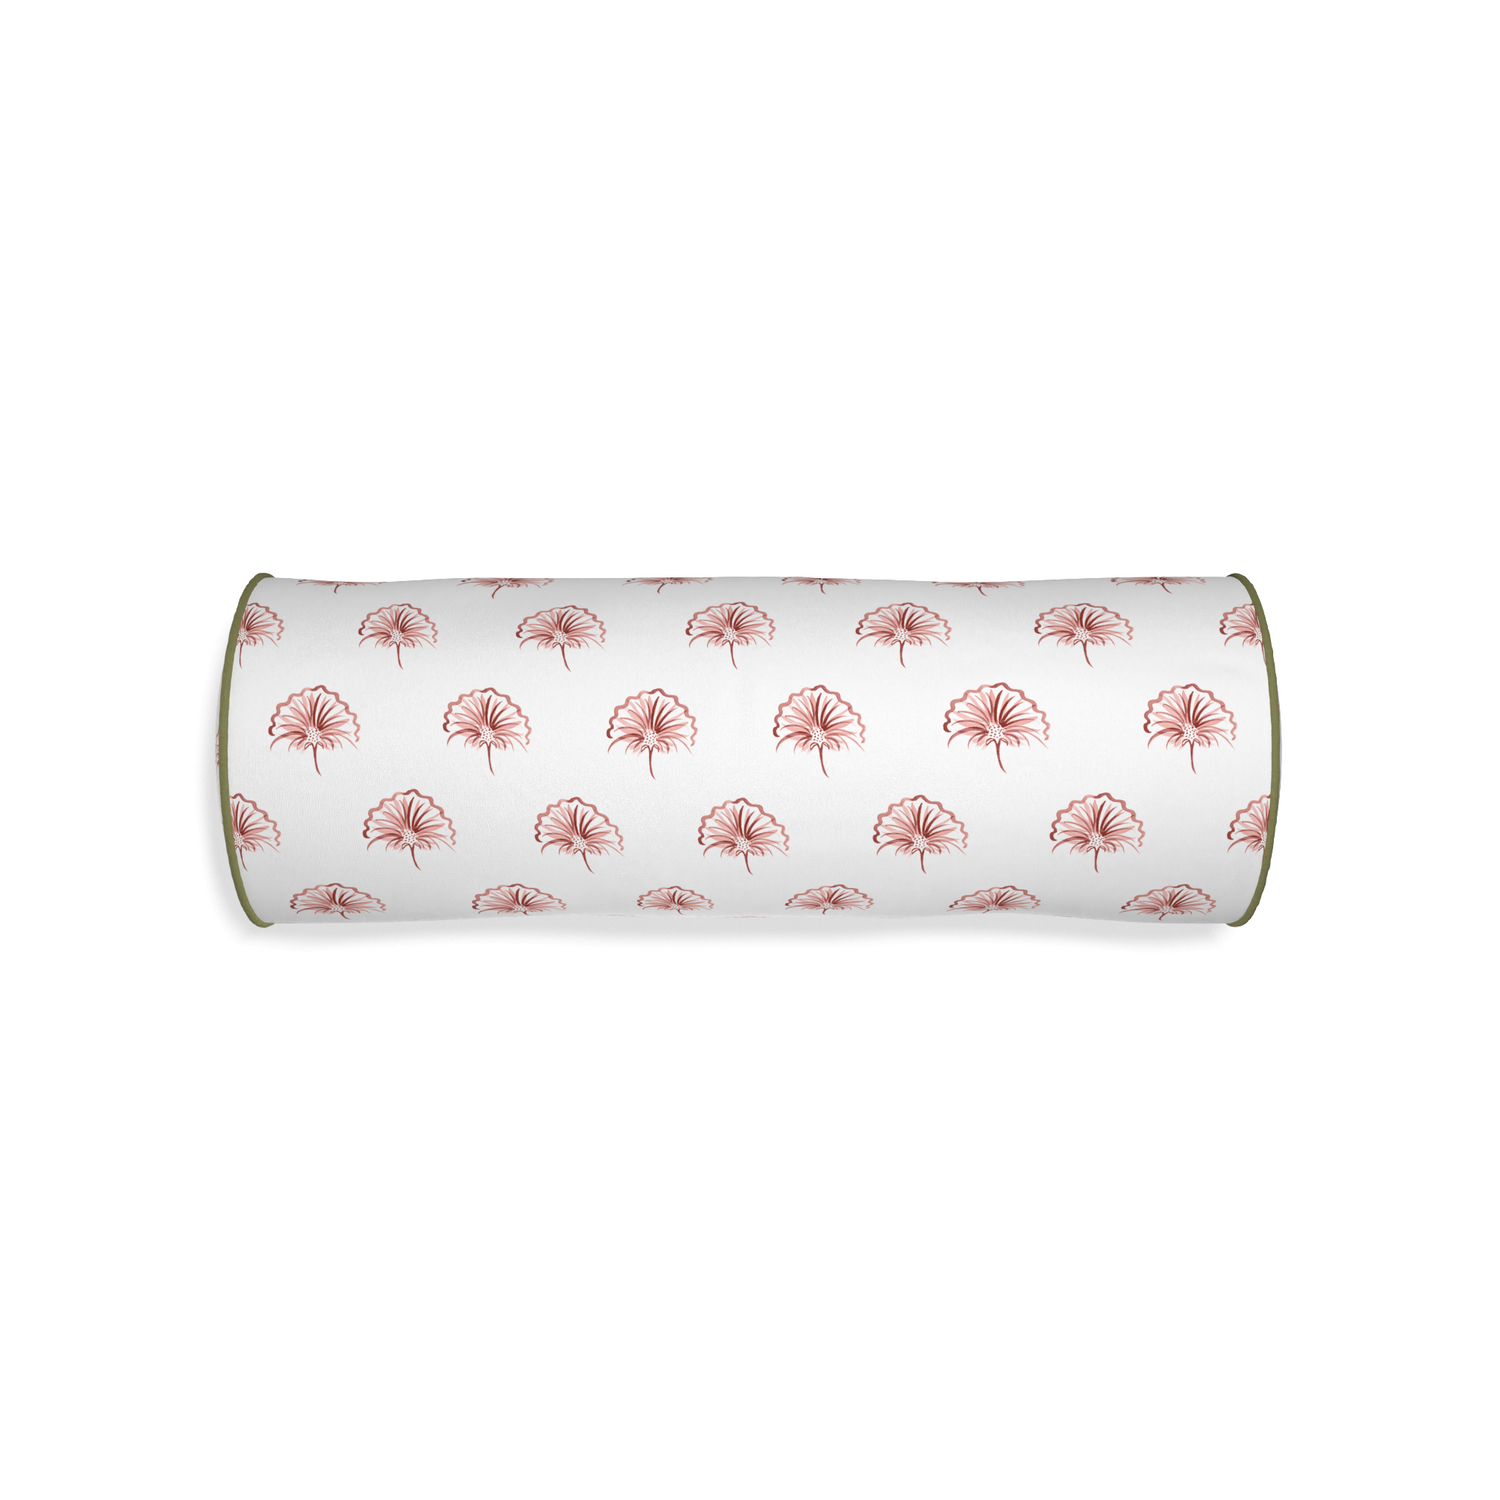 Bolster penelope rose custom pillow with moss piping on white background